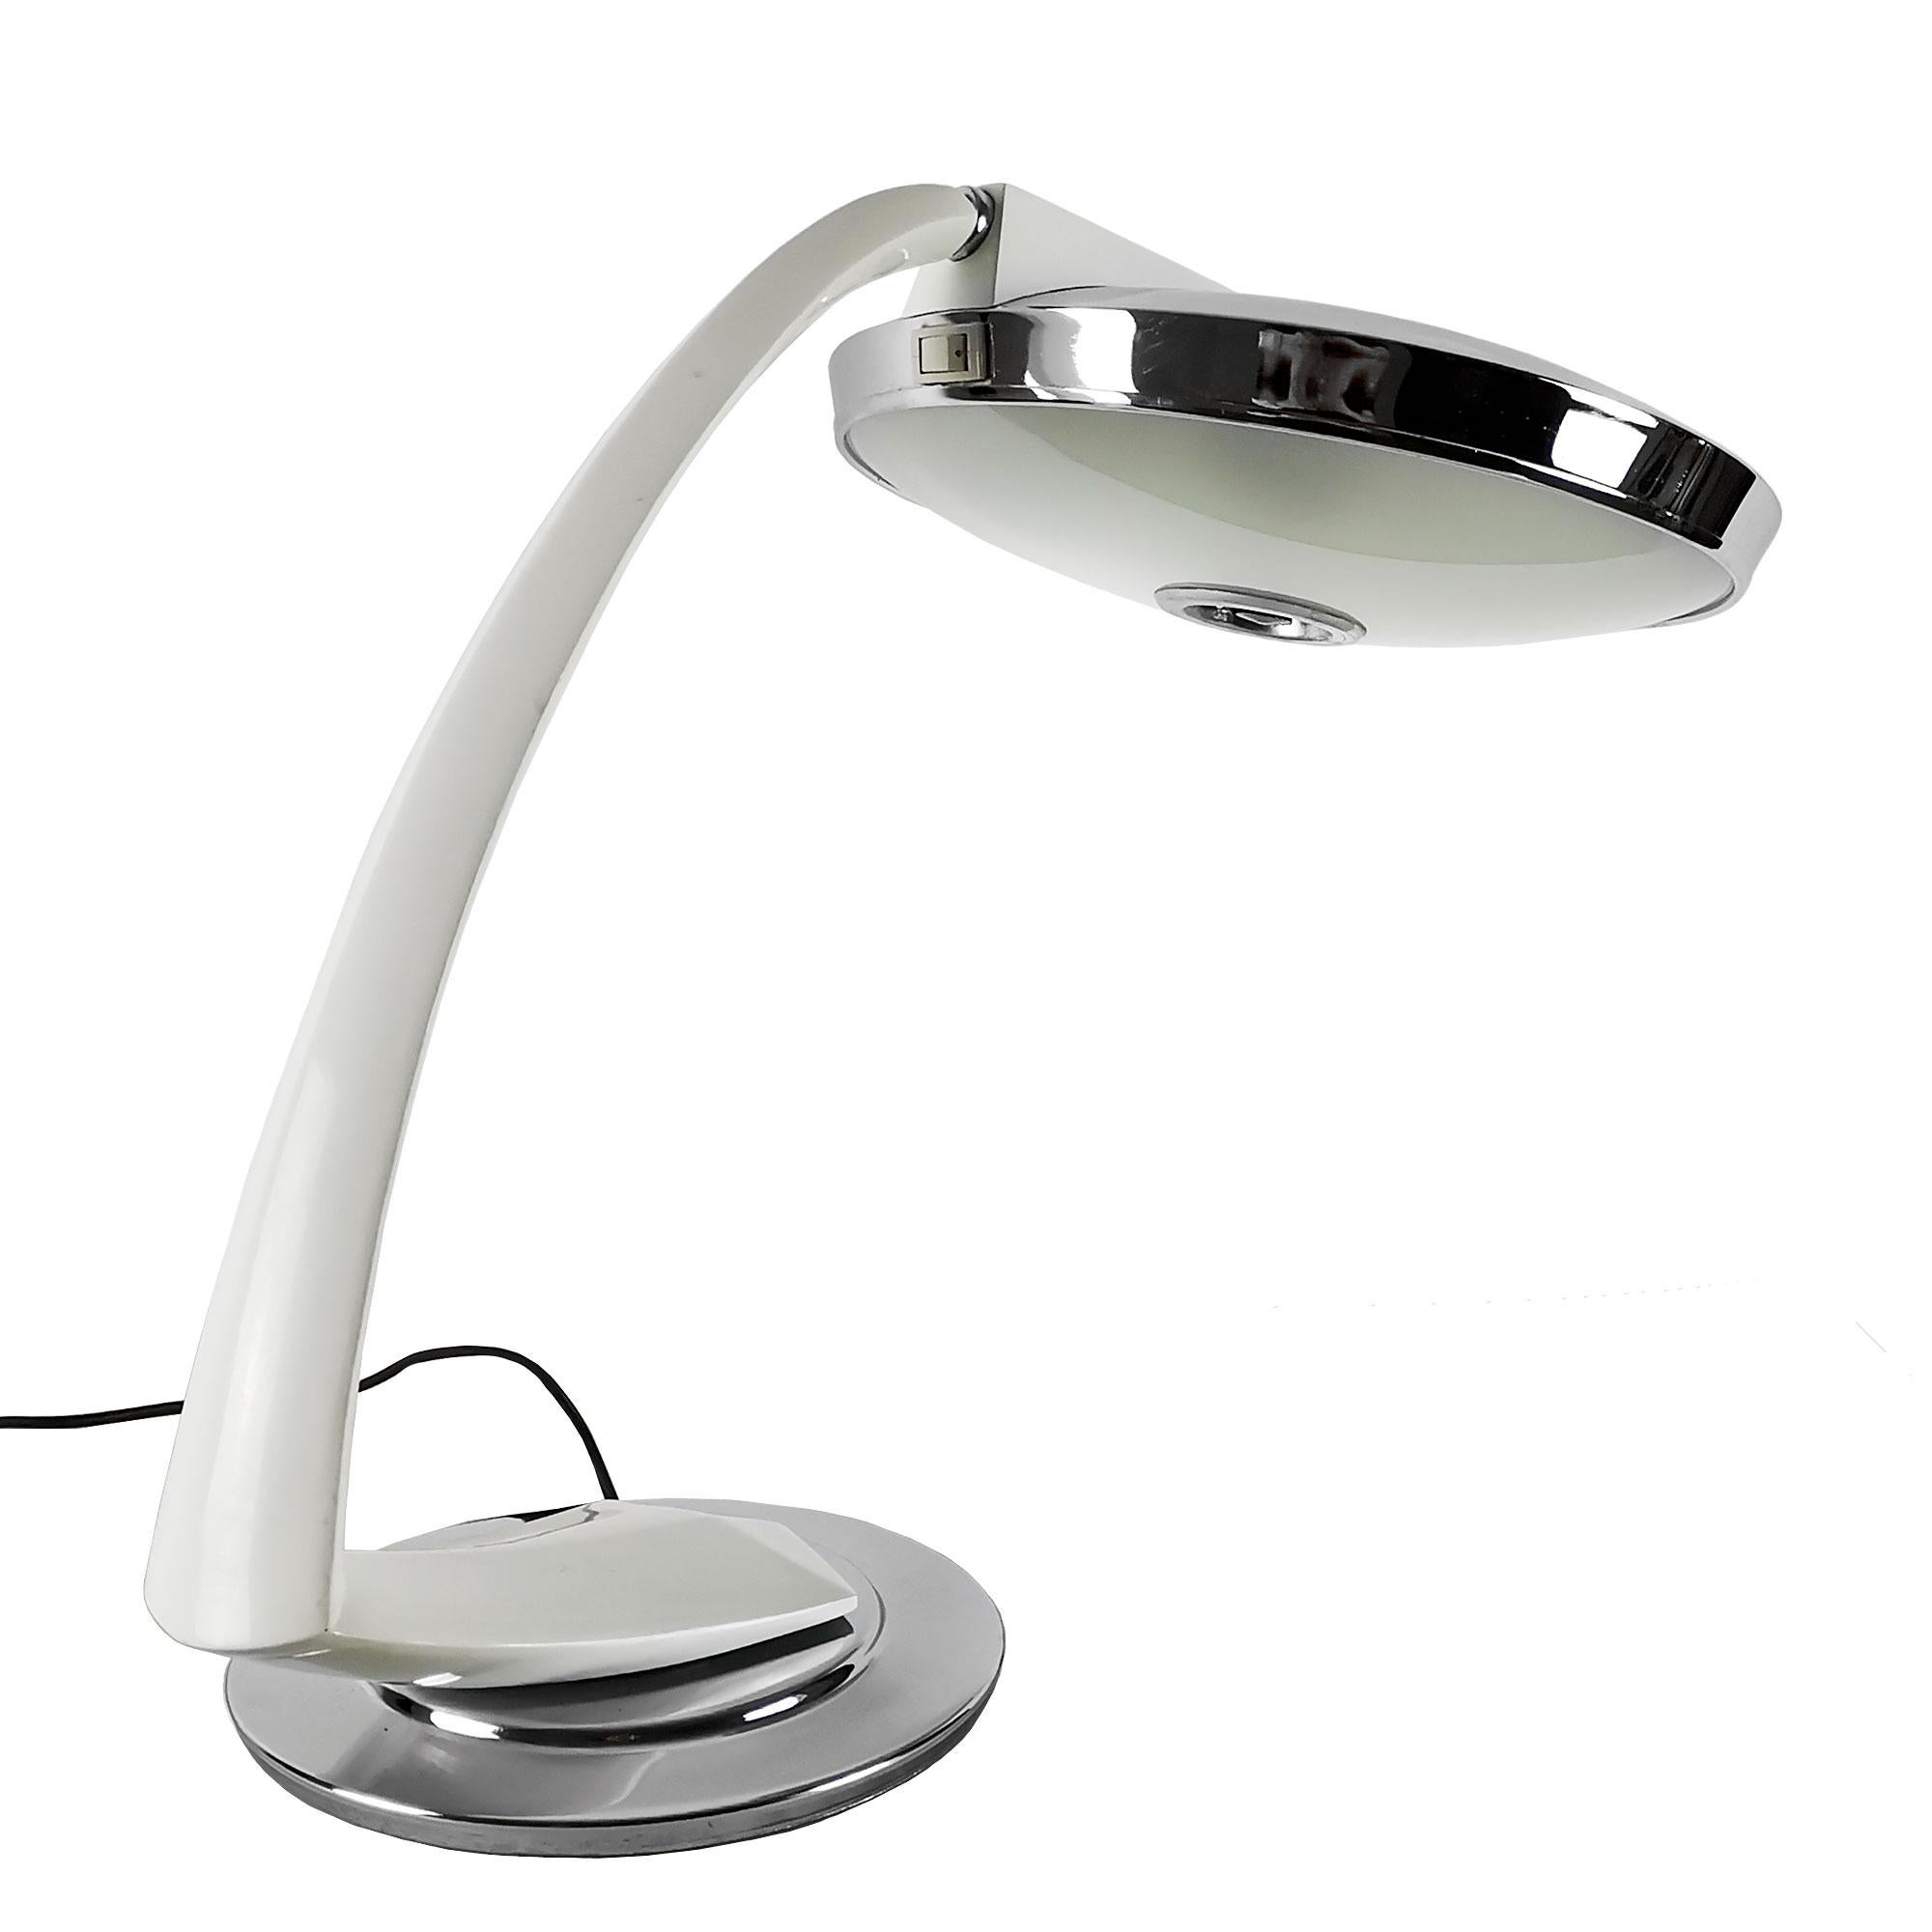 Large desk lamp, white enameled steel arm pivoting on a nickel plated metal round base, frosted glass diffuser with a nickel plated metal cover.
Model: Boomerang 2000
Maker: Fase (Stamp in the base)

Spain c. 1970.